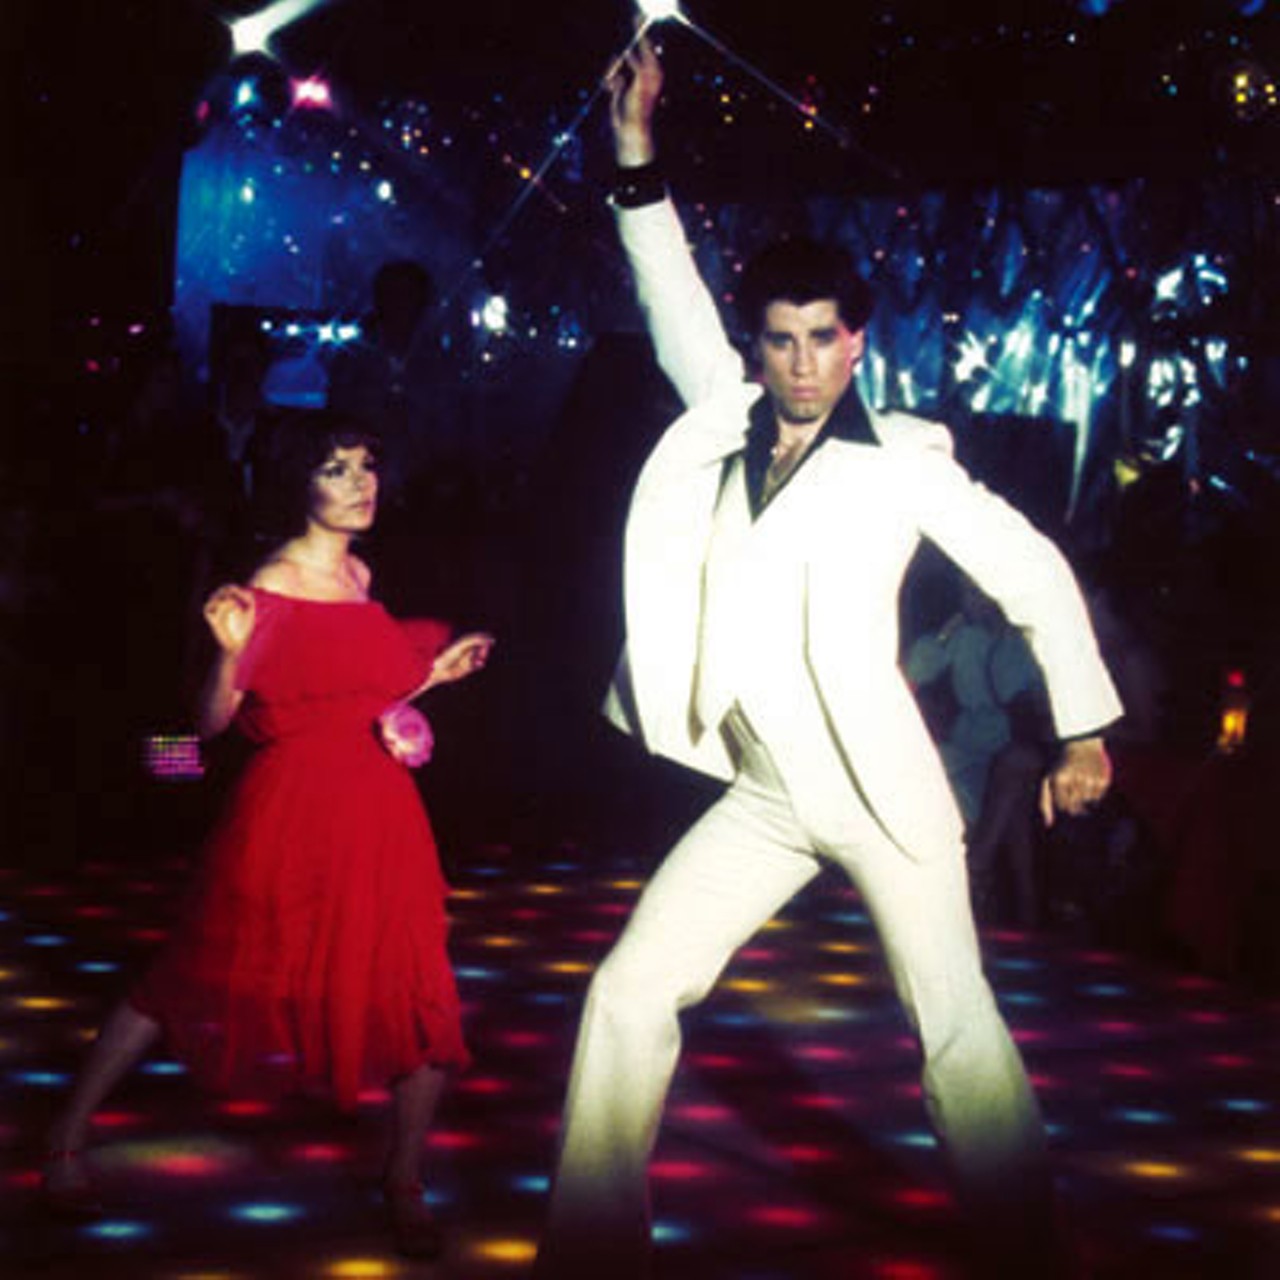 When disco became popular in the ’70s, it had its fair share of haters who thought it diminished the quality of rock n’ roll. But even acts such as the Rolling Stones embraced some of disco’s funky bass riffs and synthesizer flourishes. In retrospect, disco looks like a cool musical movement, even if some of the outfits and dance moves were rather cheesy. Disco Dada Dreamscape, Spaces’ 35th anniversary annual benefit and art auction, celebrates all things disco. The event kicks off tonight at 7 with a VIP reception that includes entry to the private lounge and free drink tickets. Then, the doors open to the general public at 8 p.m. VIP tickets cost $135 and general public tickets are $45. If you’re just looking to dance, come at 10 p.m. and only pay $10 for a ticket. (Niesel)